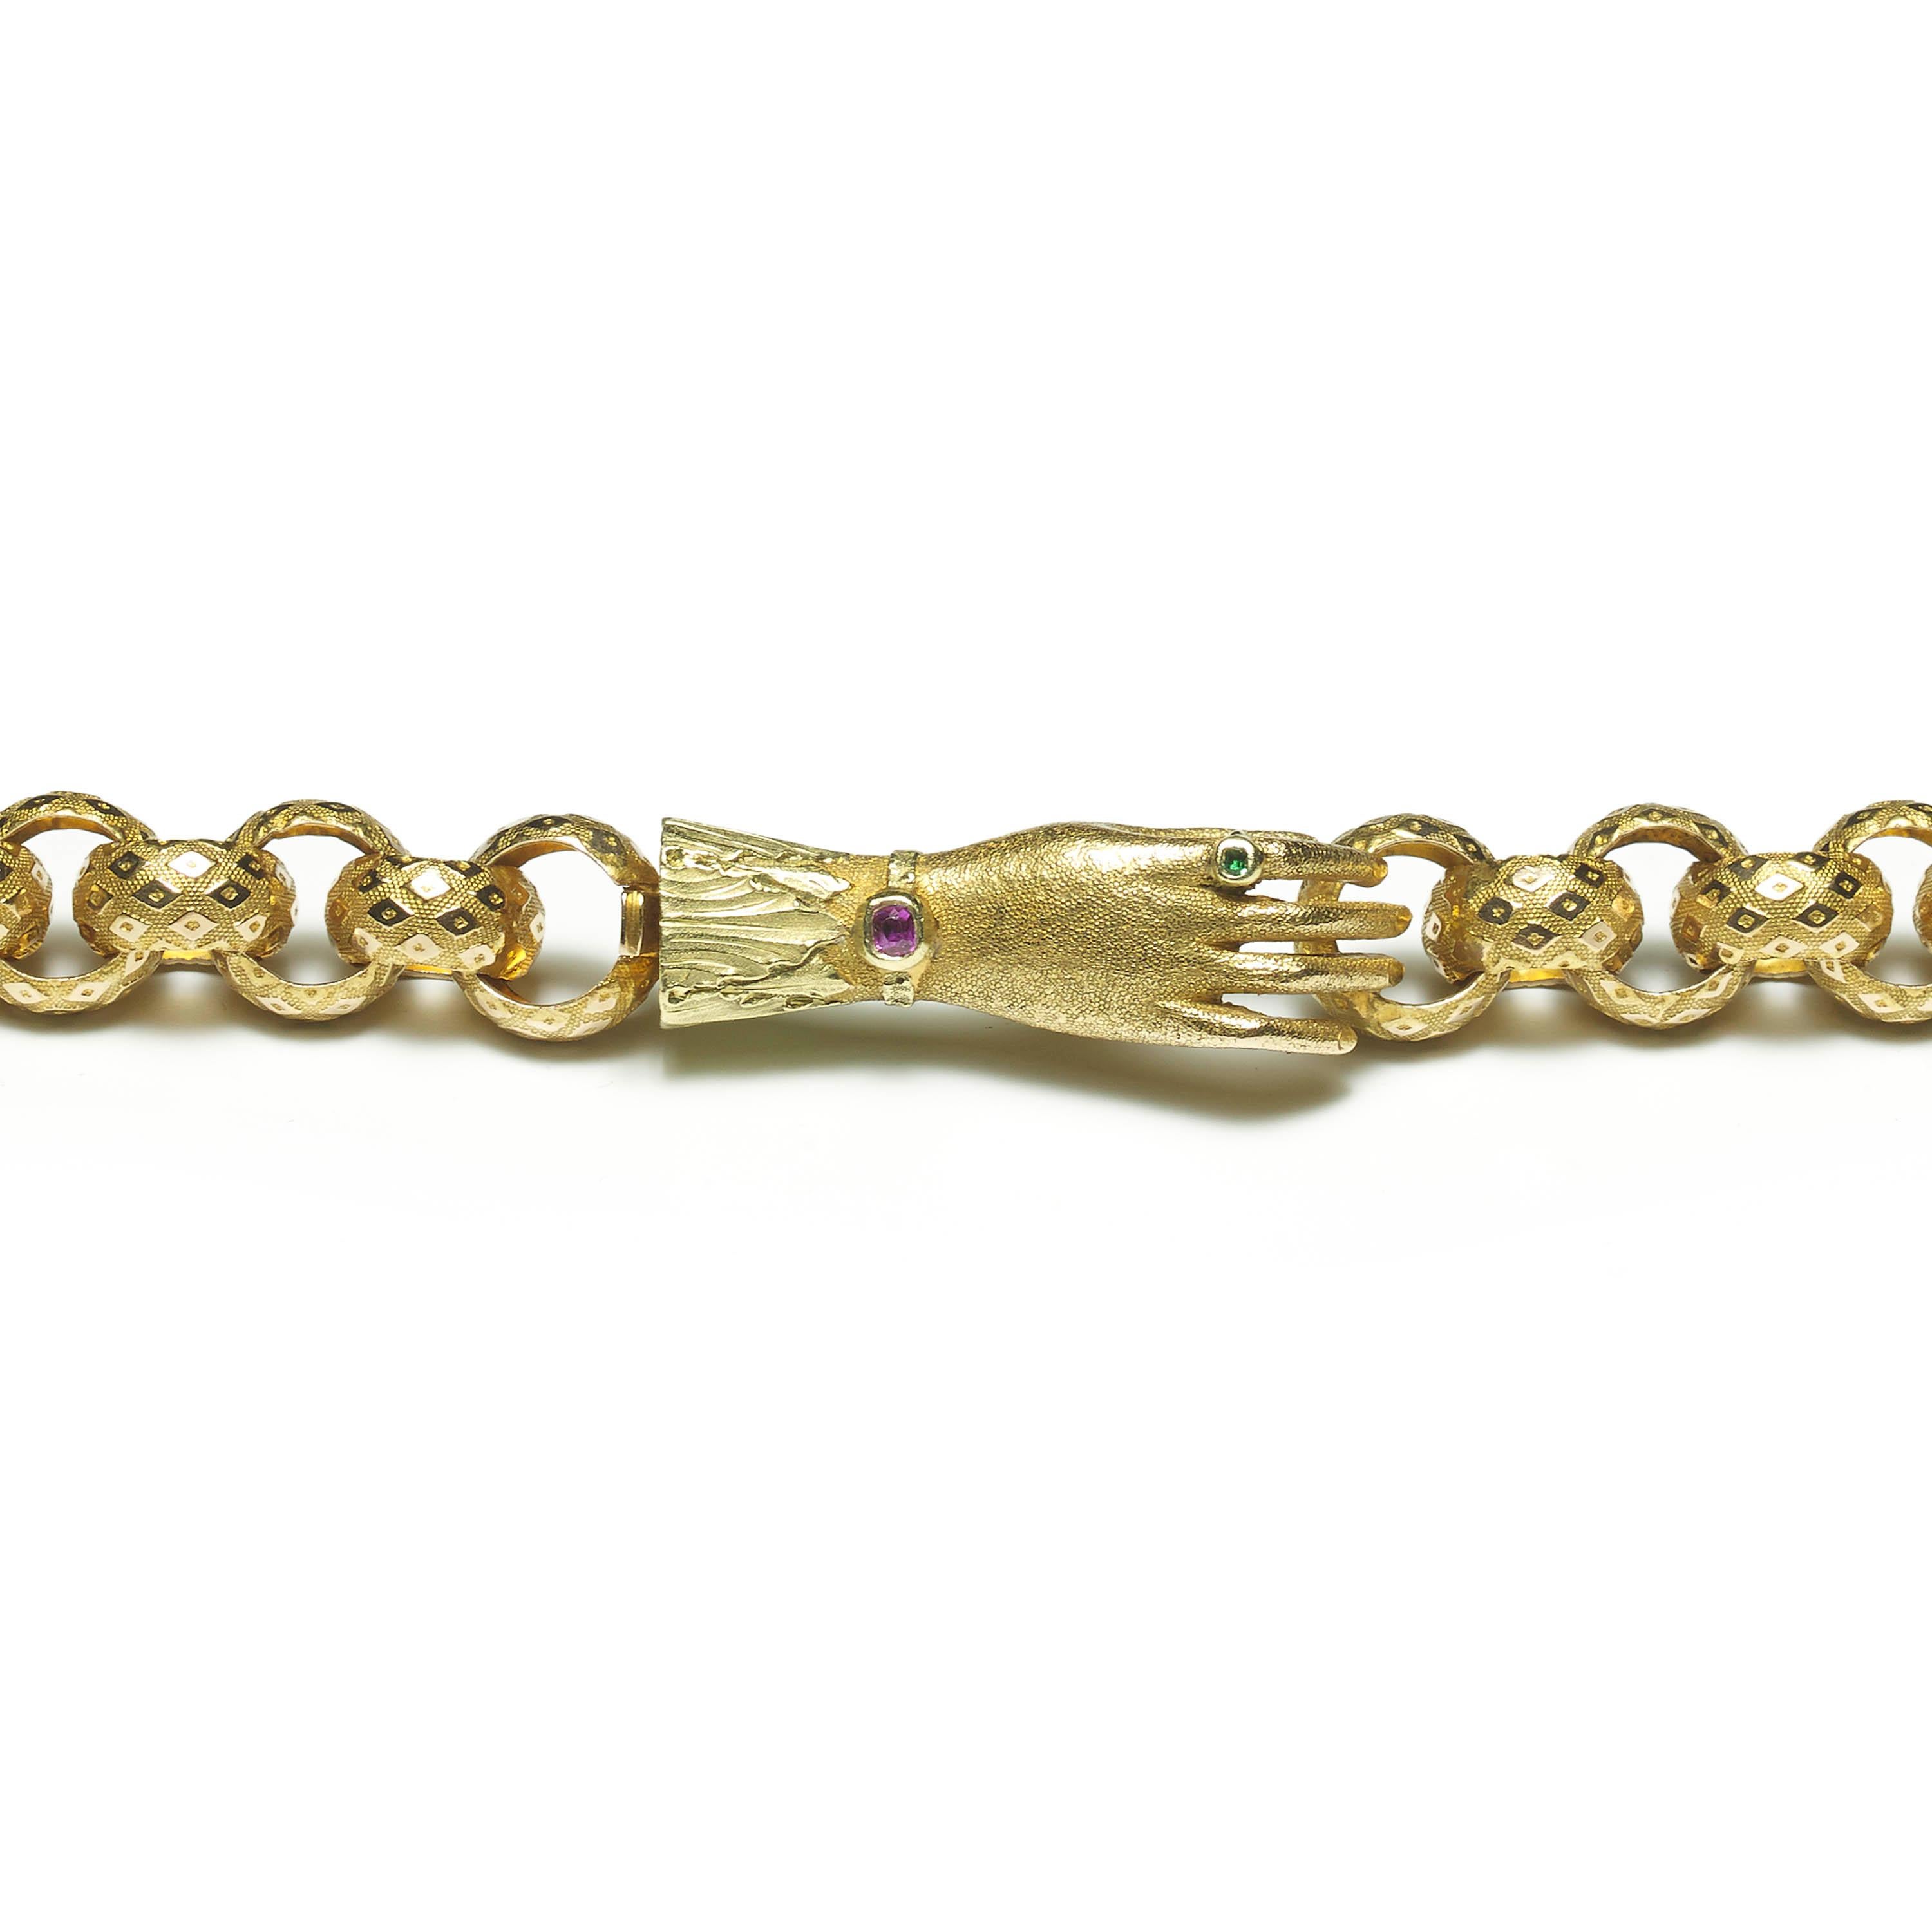 A Georgian long chain, in 18ct yellow gold, comprised of round links with diamond patterns, terminating in a hand-shaped clasp, the hand with ruby bracelet and emerald ring details, with the original fitted case. Circa 1830.